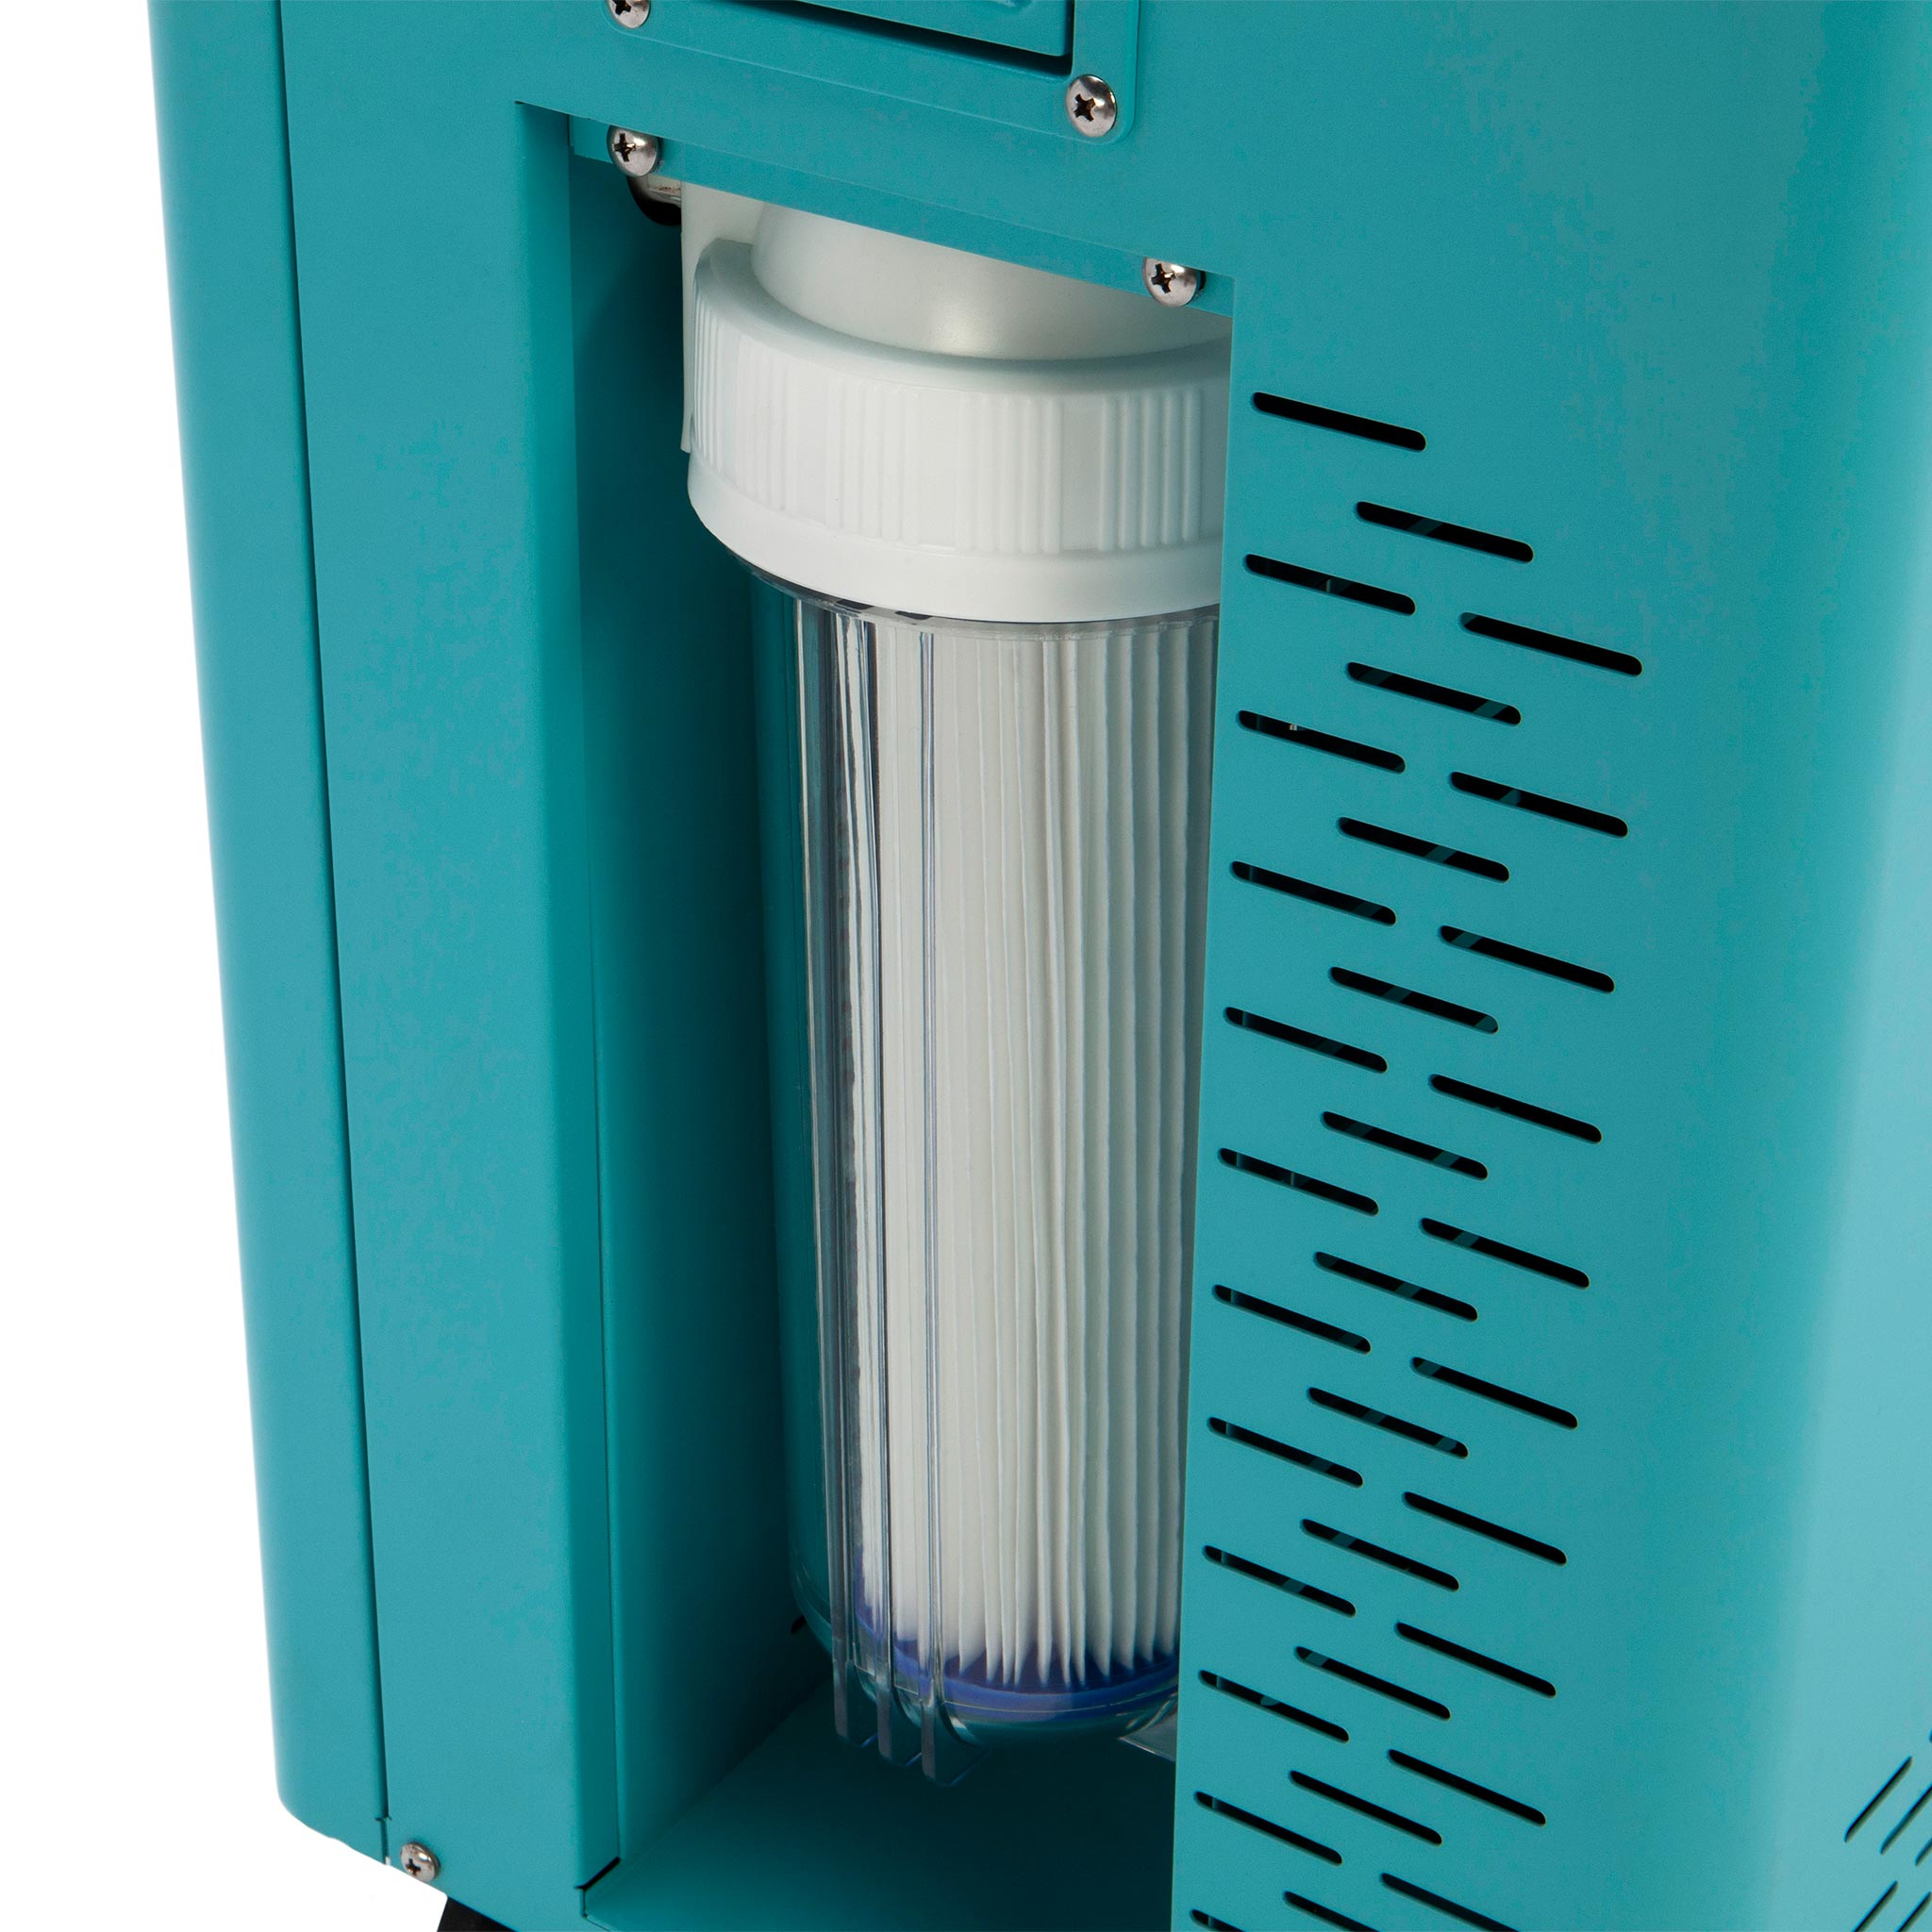 A blue CRYOSPRING water purifier with a filter in it, perfect for your recovery routine.